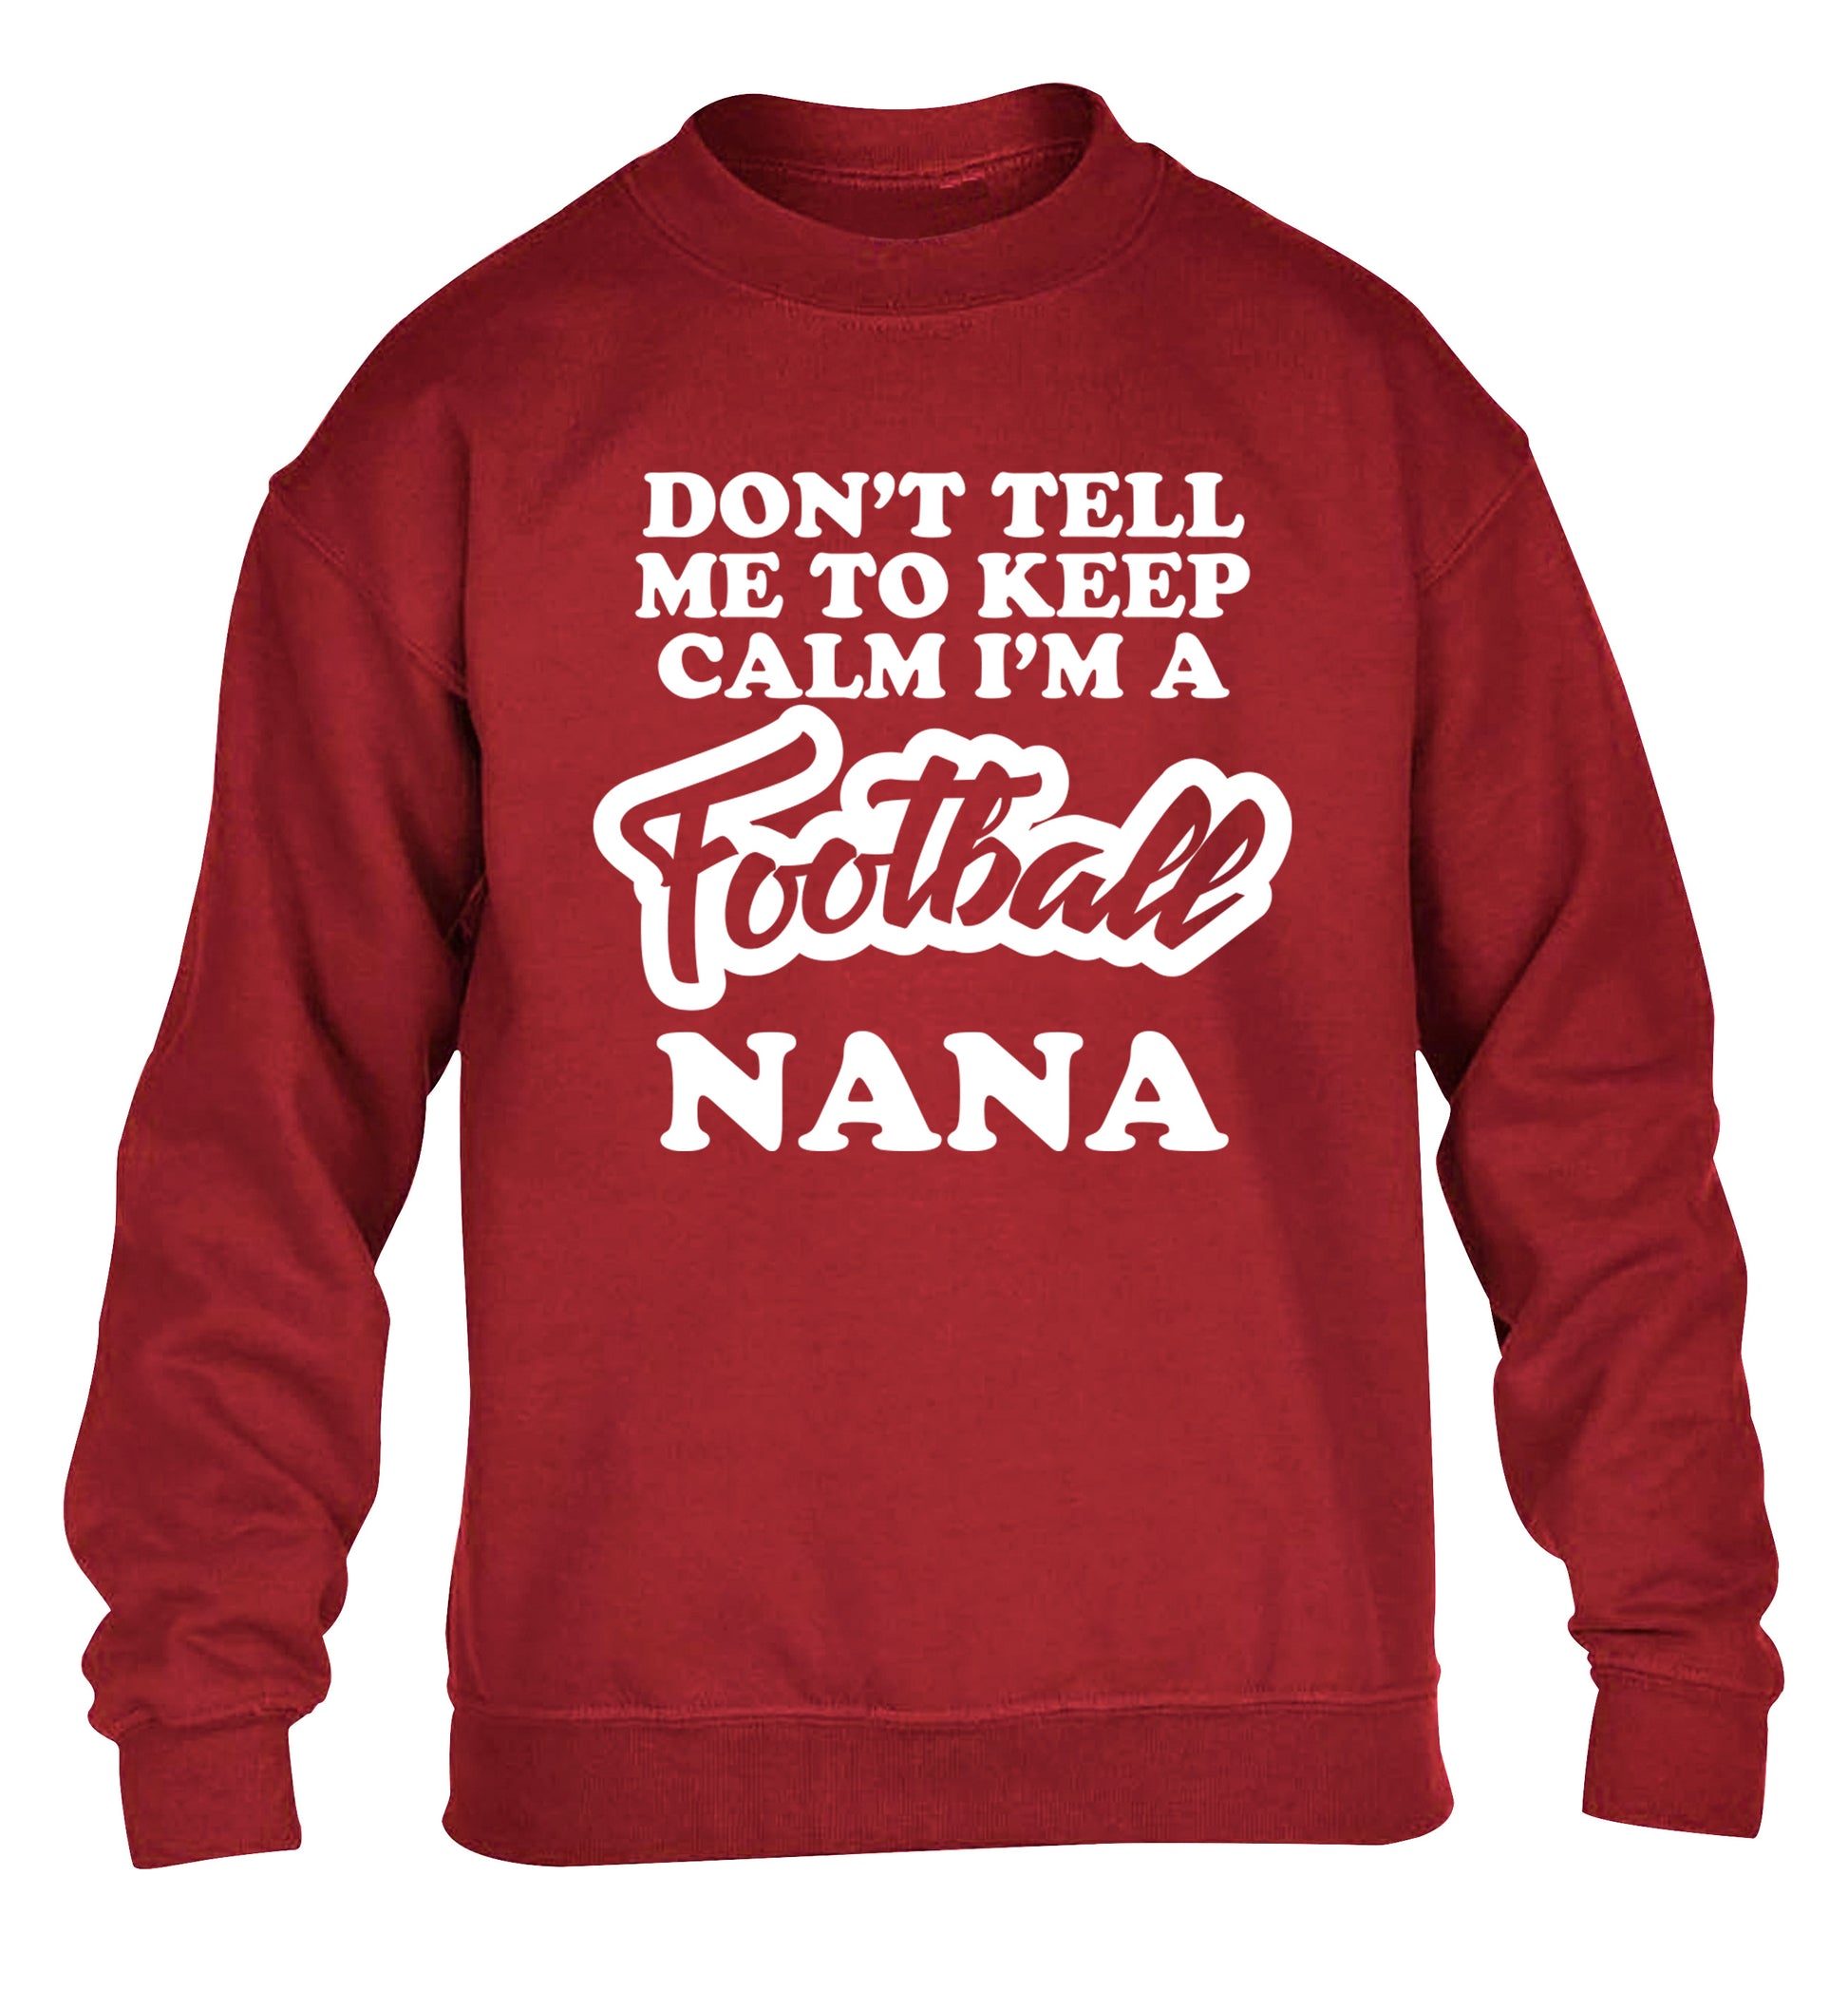 Don't tell me to keep calm I'm a football nana children's grey sweater 12-14 Years